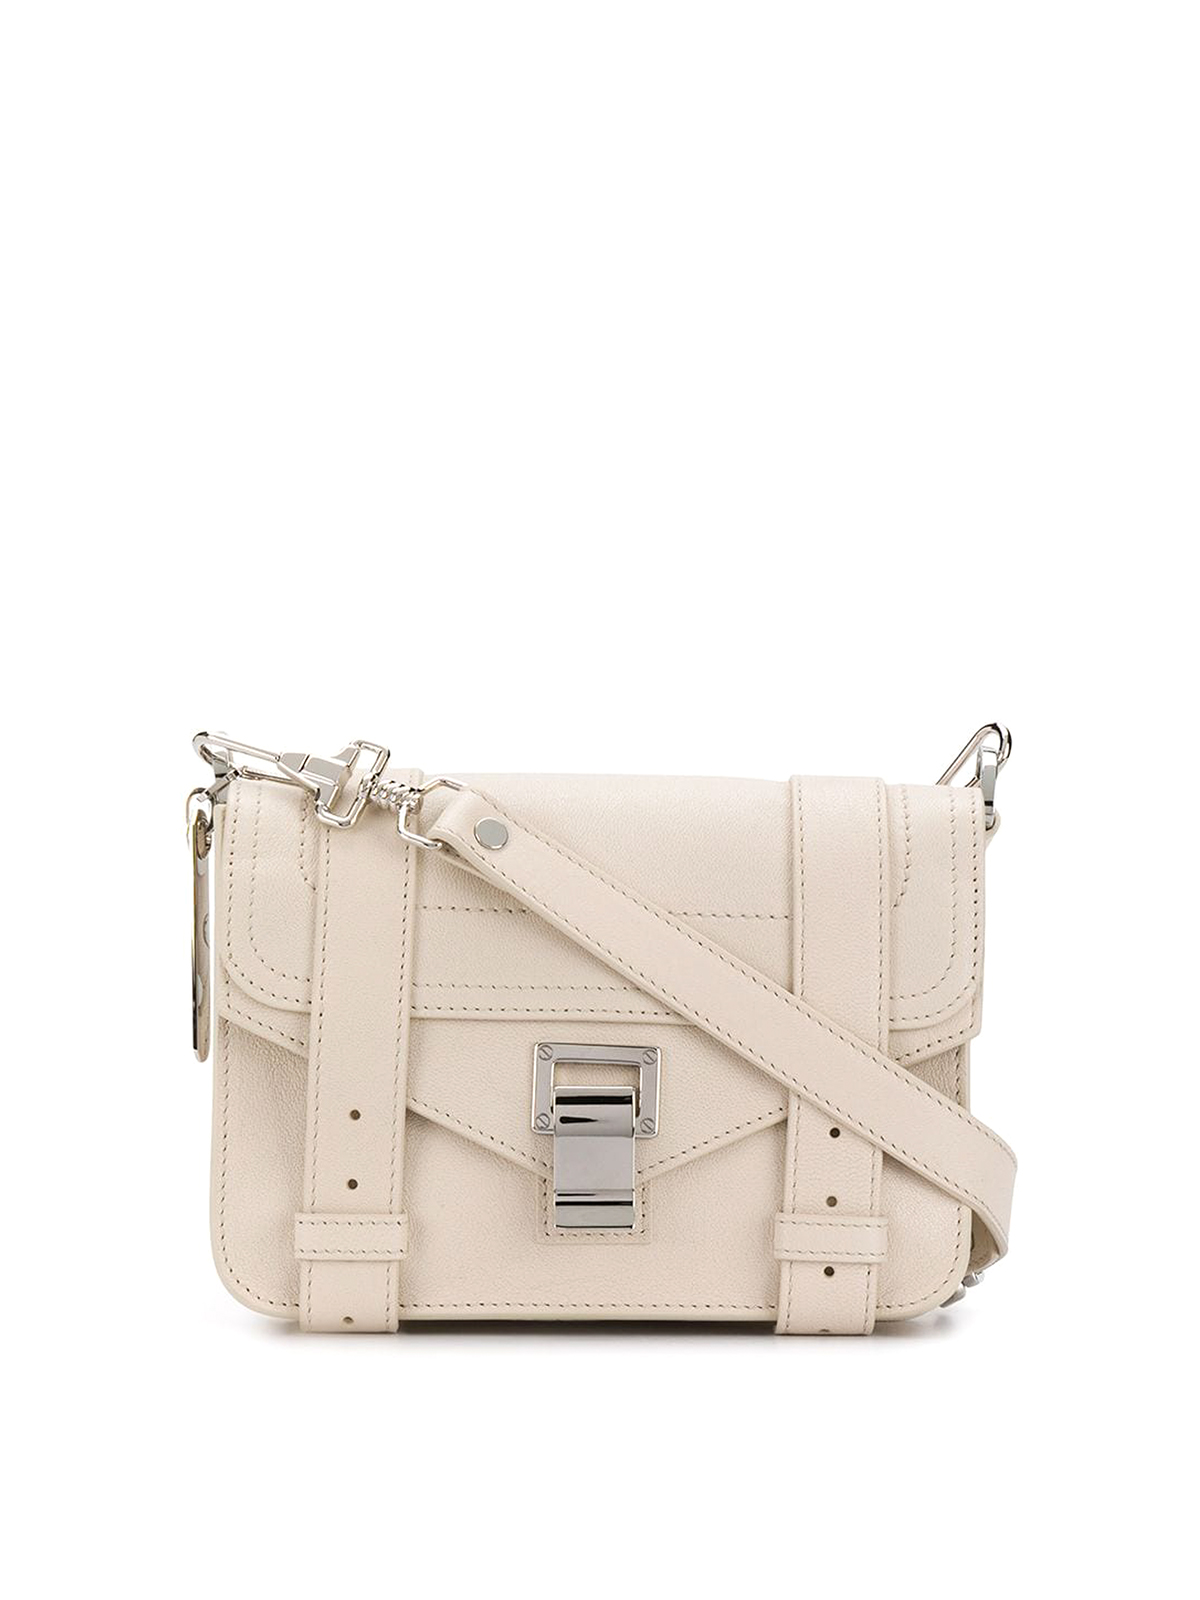 PROENZA SCHOULER LEATHER FLAP FRONT BAG WITH METAL TAB CLOSURE